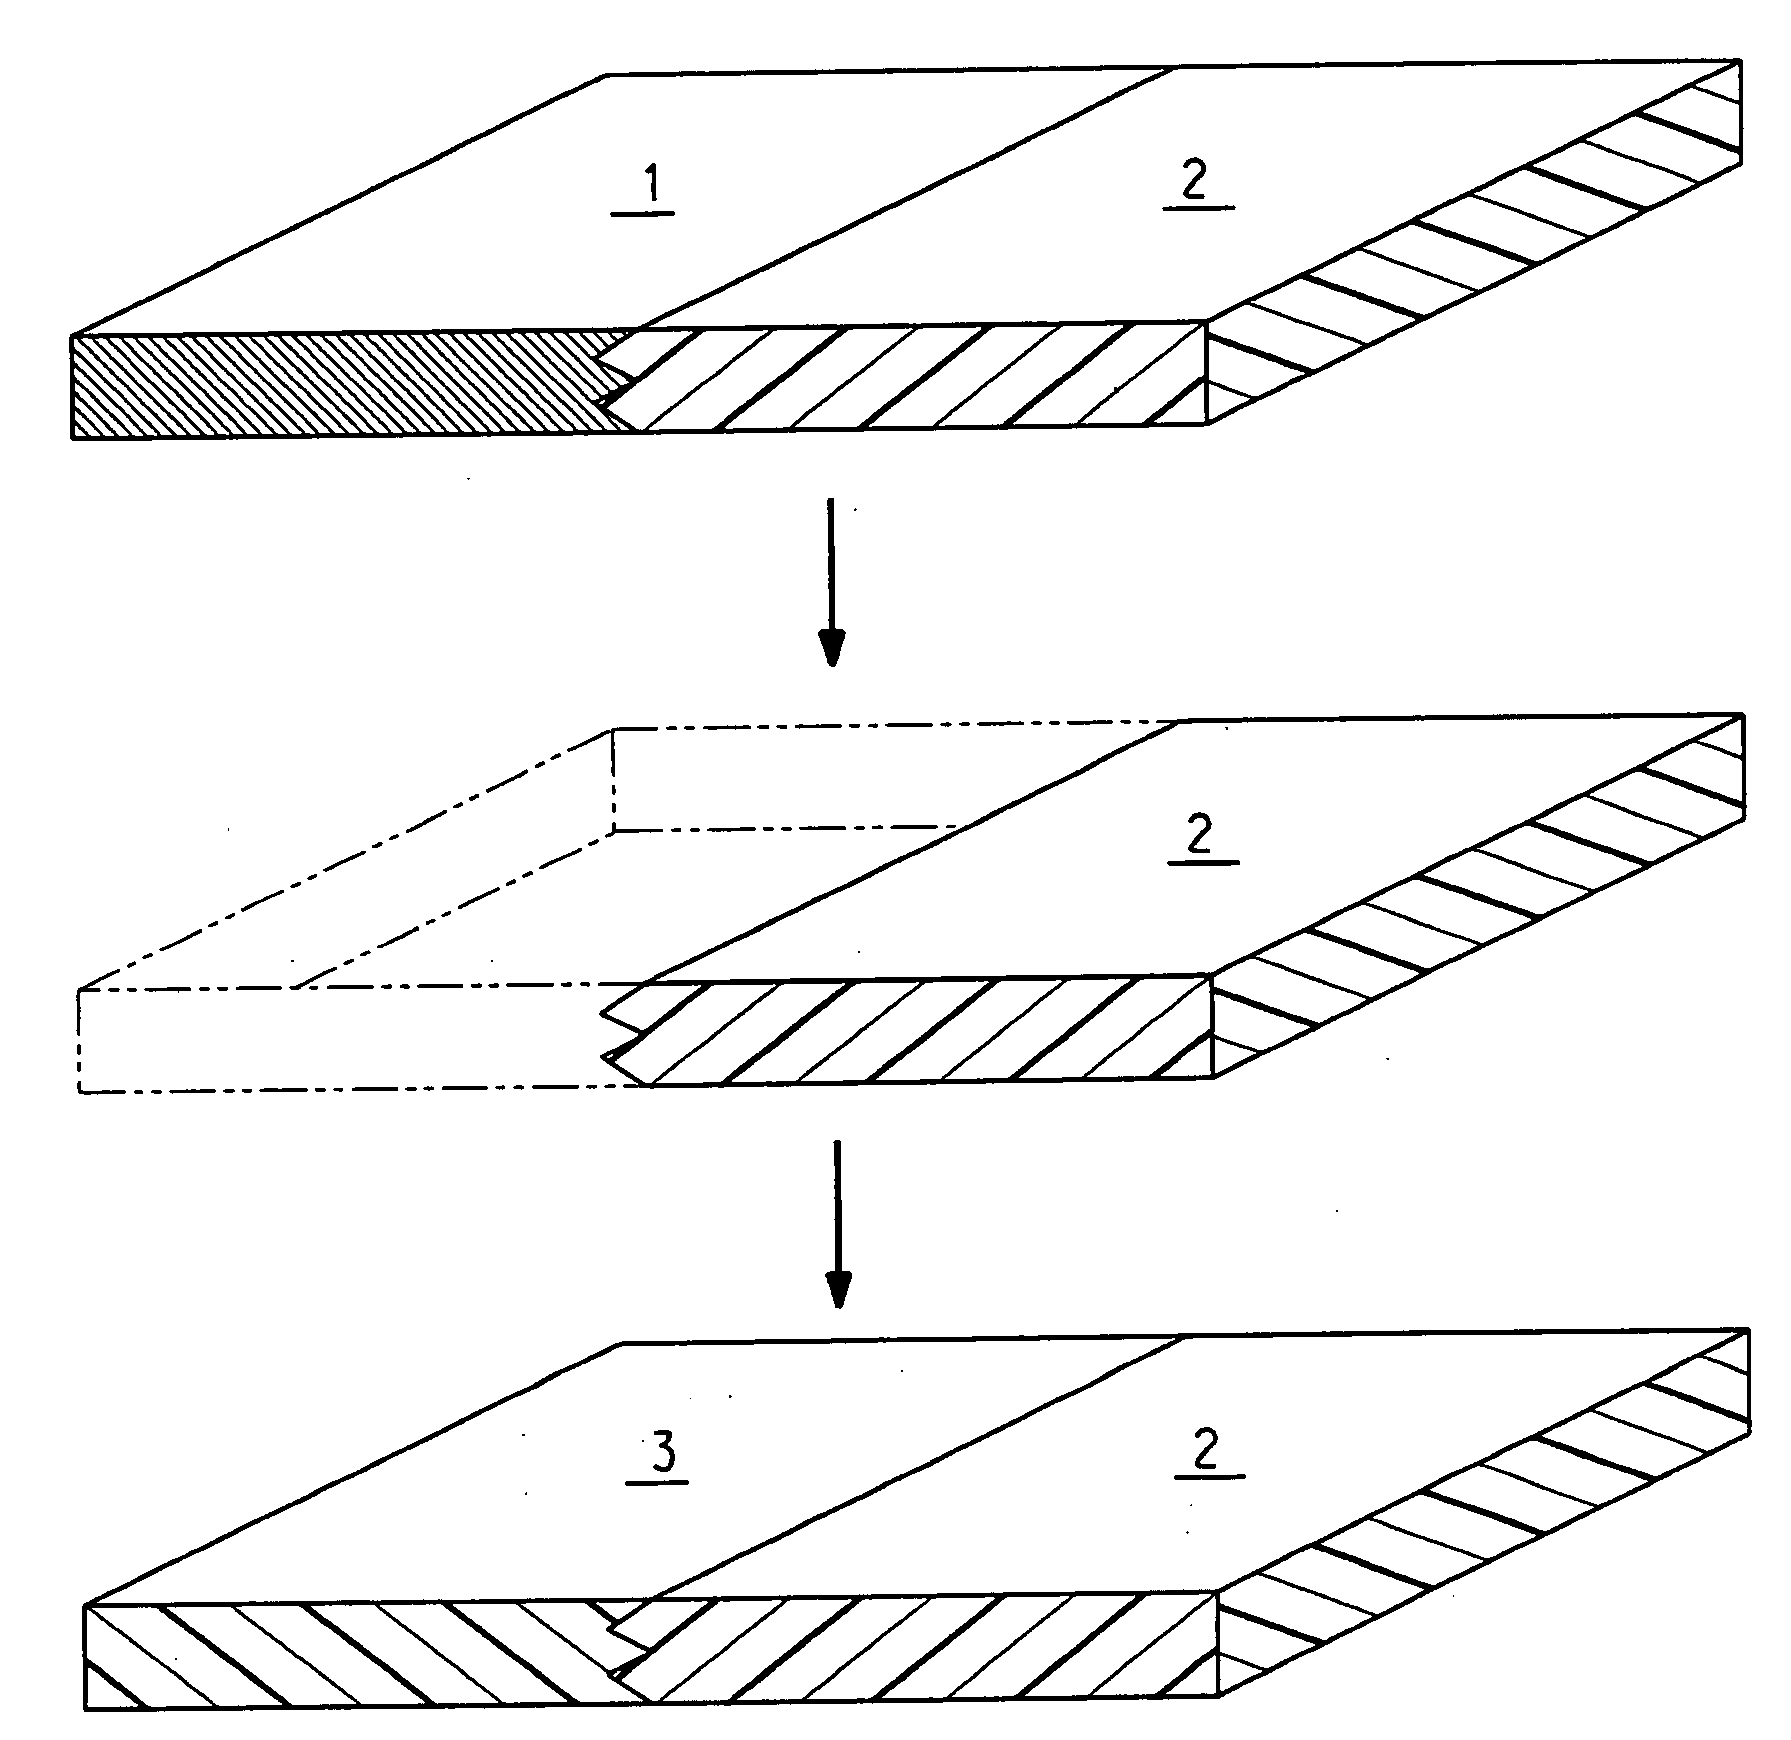 Use of polyamide compositions for making molded articles having improved adhesion, molded articles thereof and methods for adhering such materials